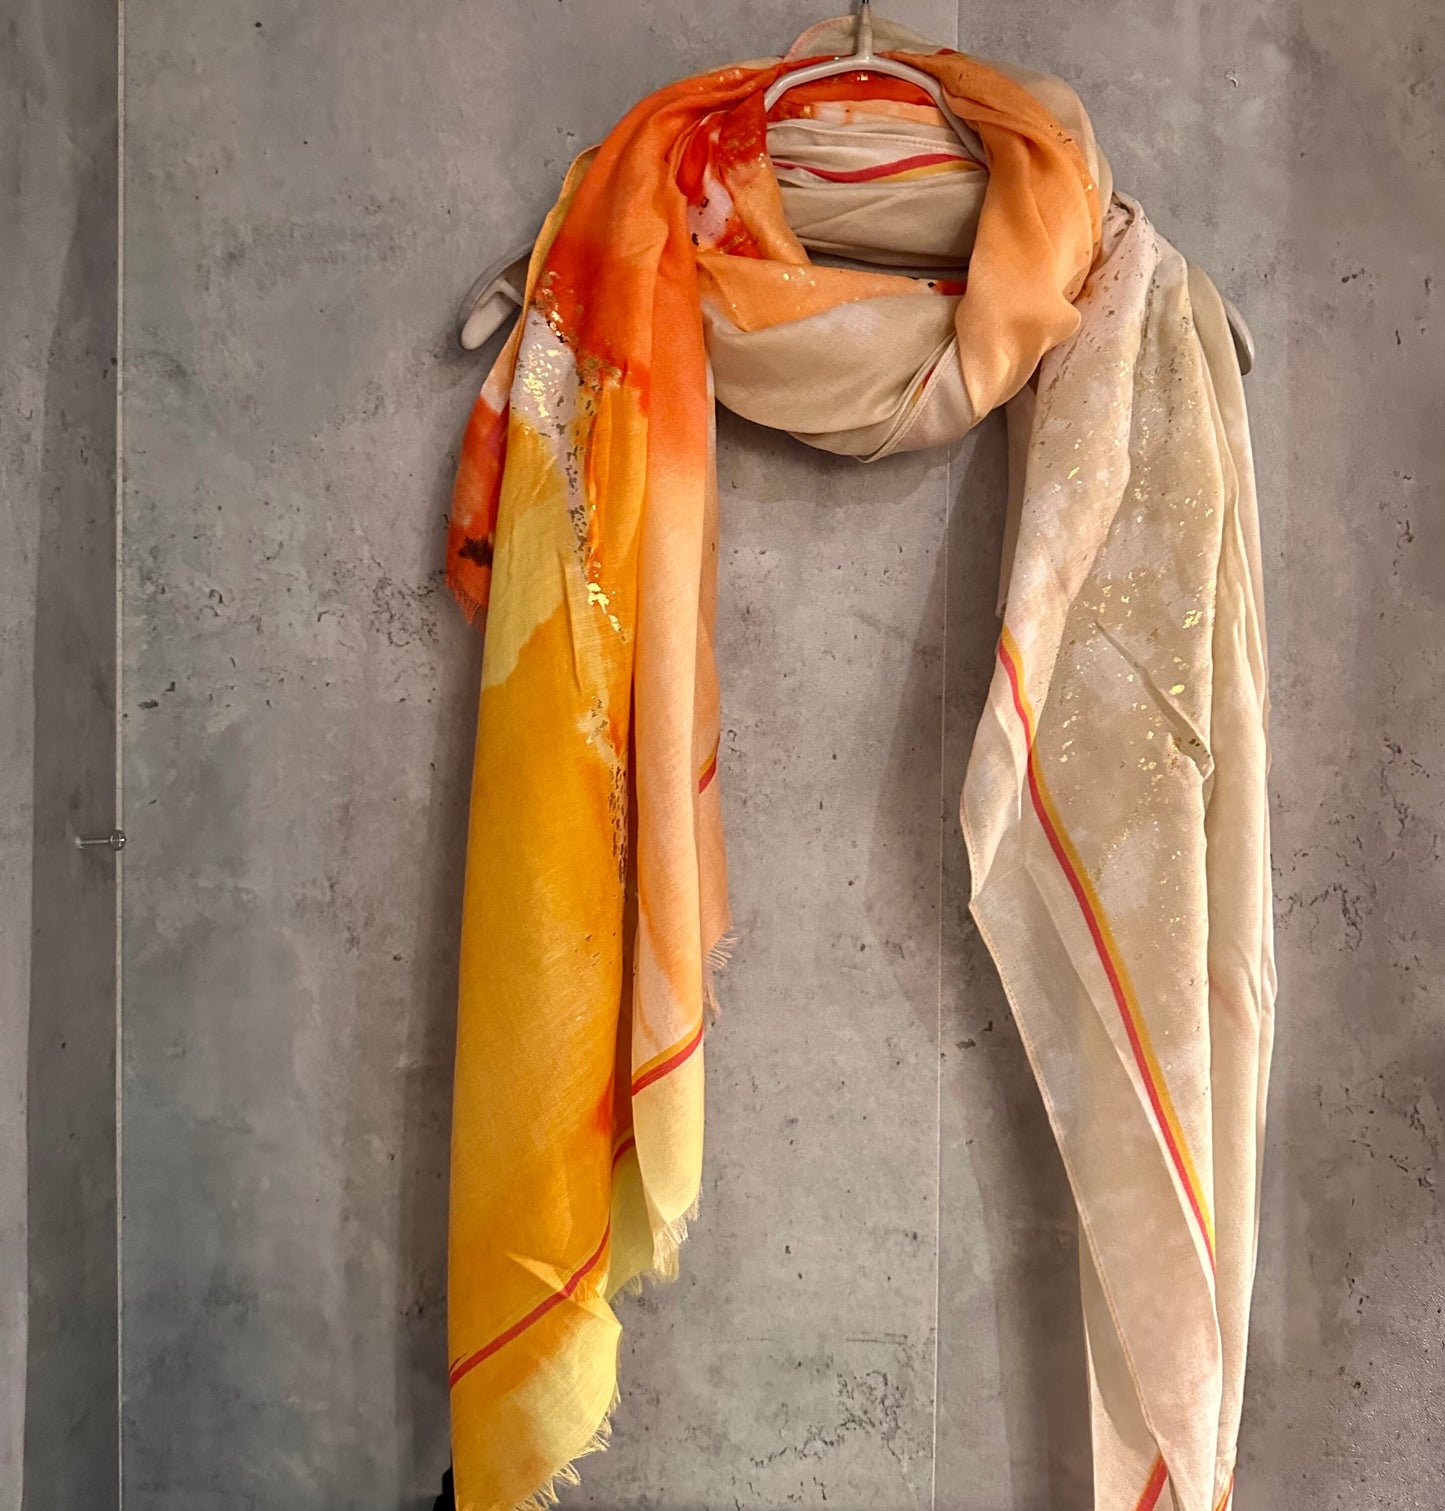 Watercolours Pattern Gold Dusk Orange Cotton Scarf/Summer Autumn Scarf/Scarf Women/Gift For Her Birthday Christmas/Gifts For Mum/UK Seller